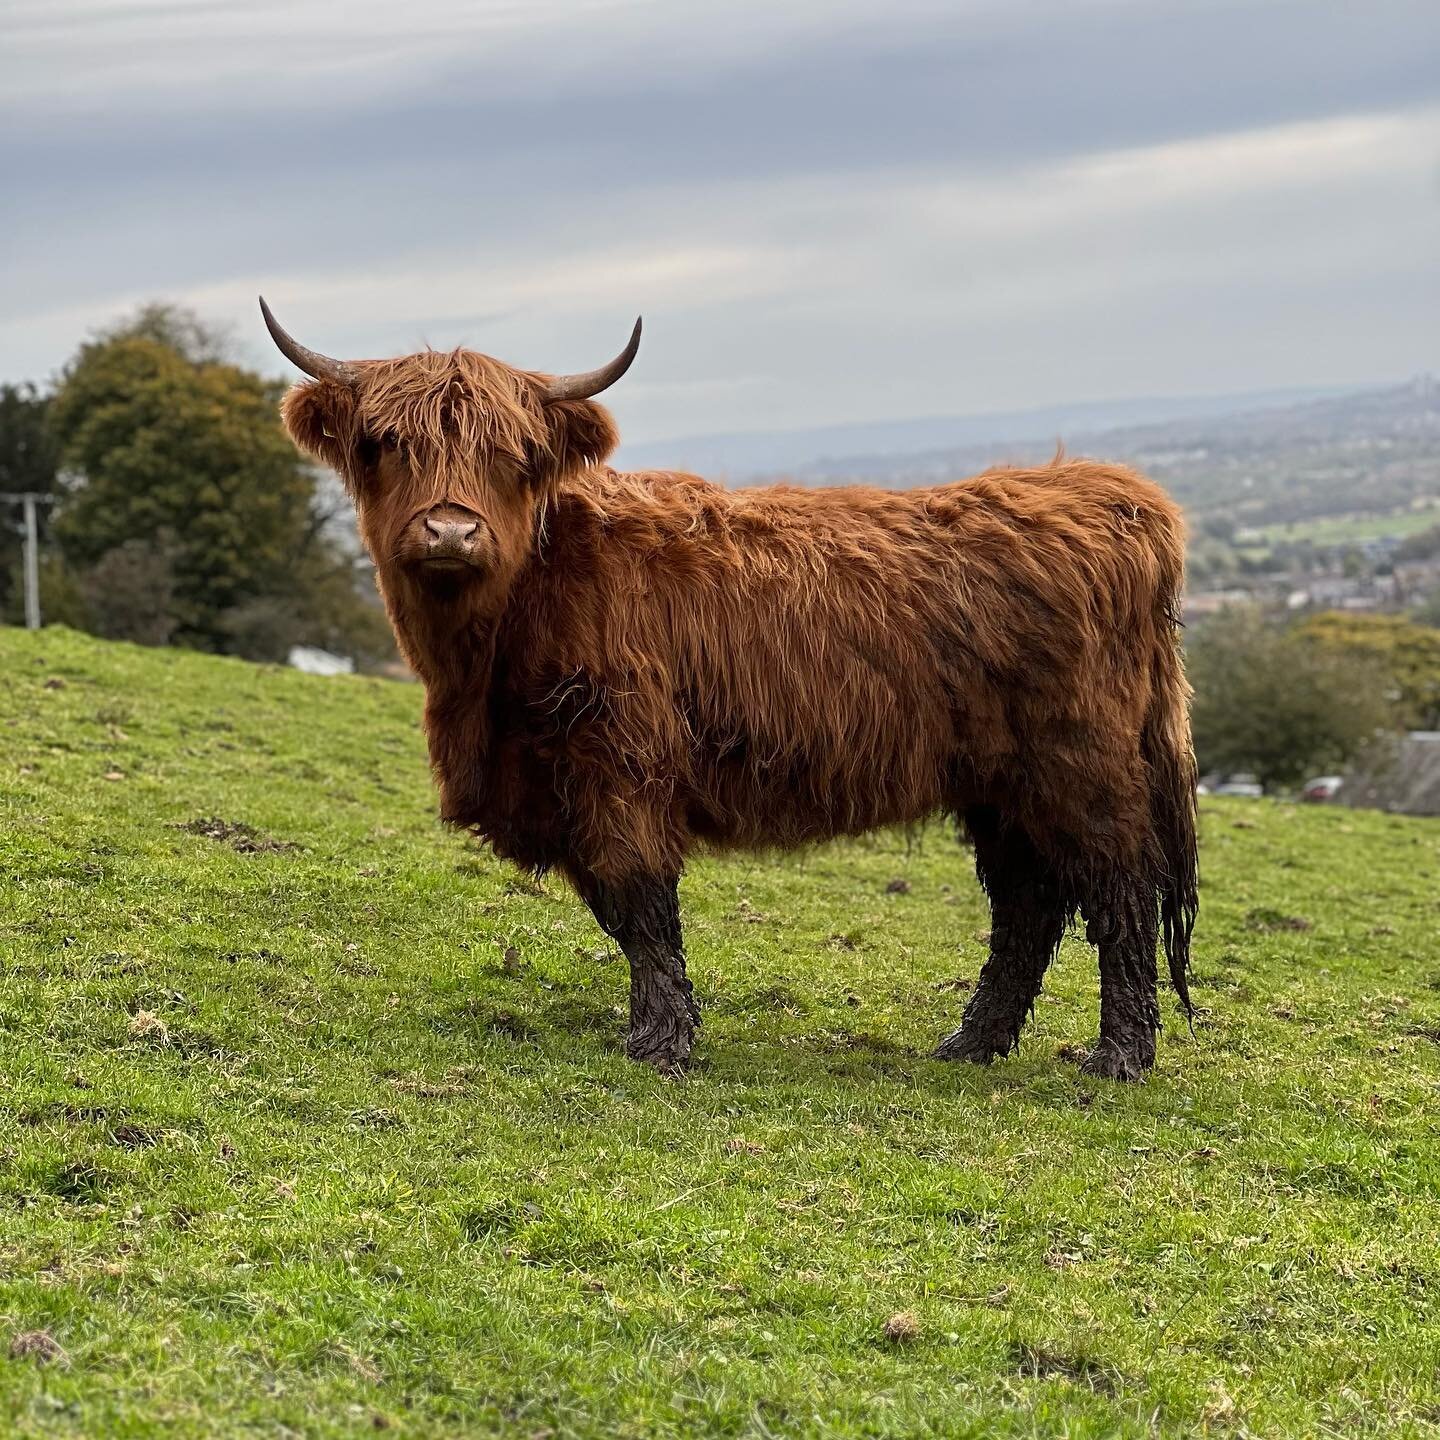 Up to her knees in mud but still managing to pose for a quick pic 📸
&bull;
&bull;
&bull;
&bull;
#highlandcow #highlandcows #highlandcattle  #highlander #shorthorn #calf #calvingseason #calving #cow #cows #cattle #cowsofinstagram #scottishcattle #far